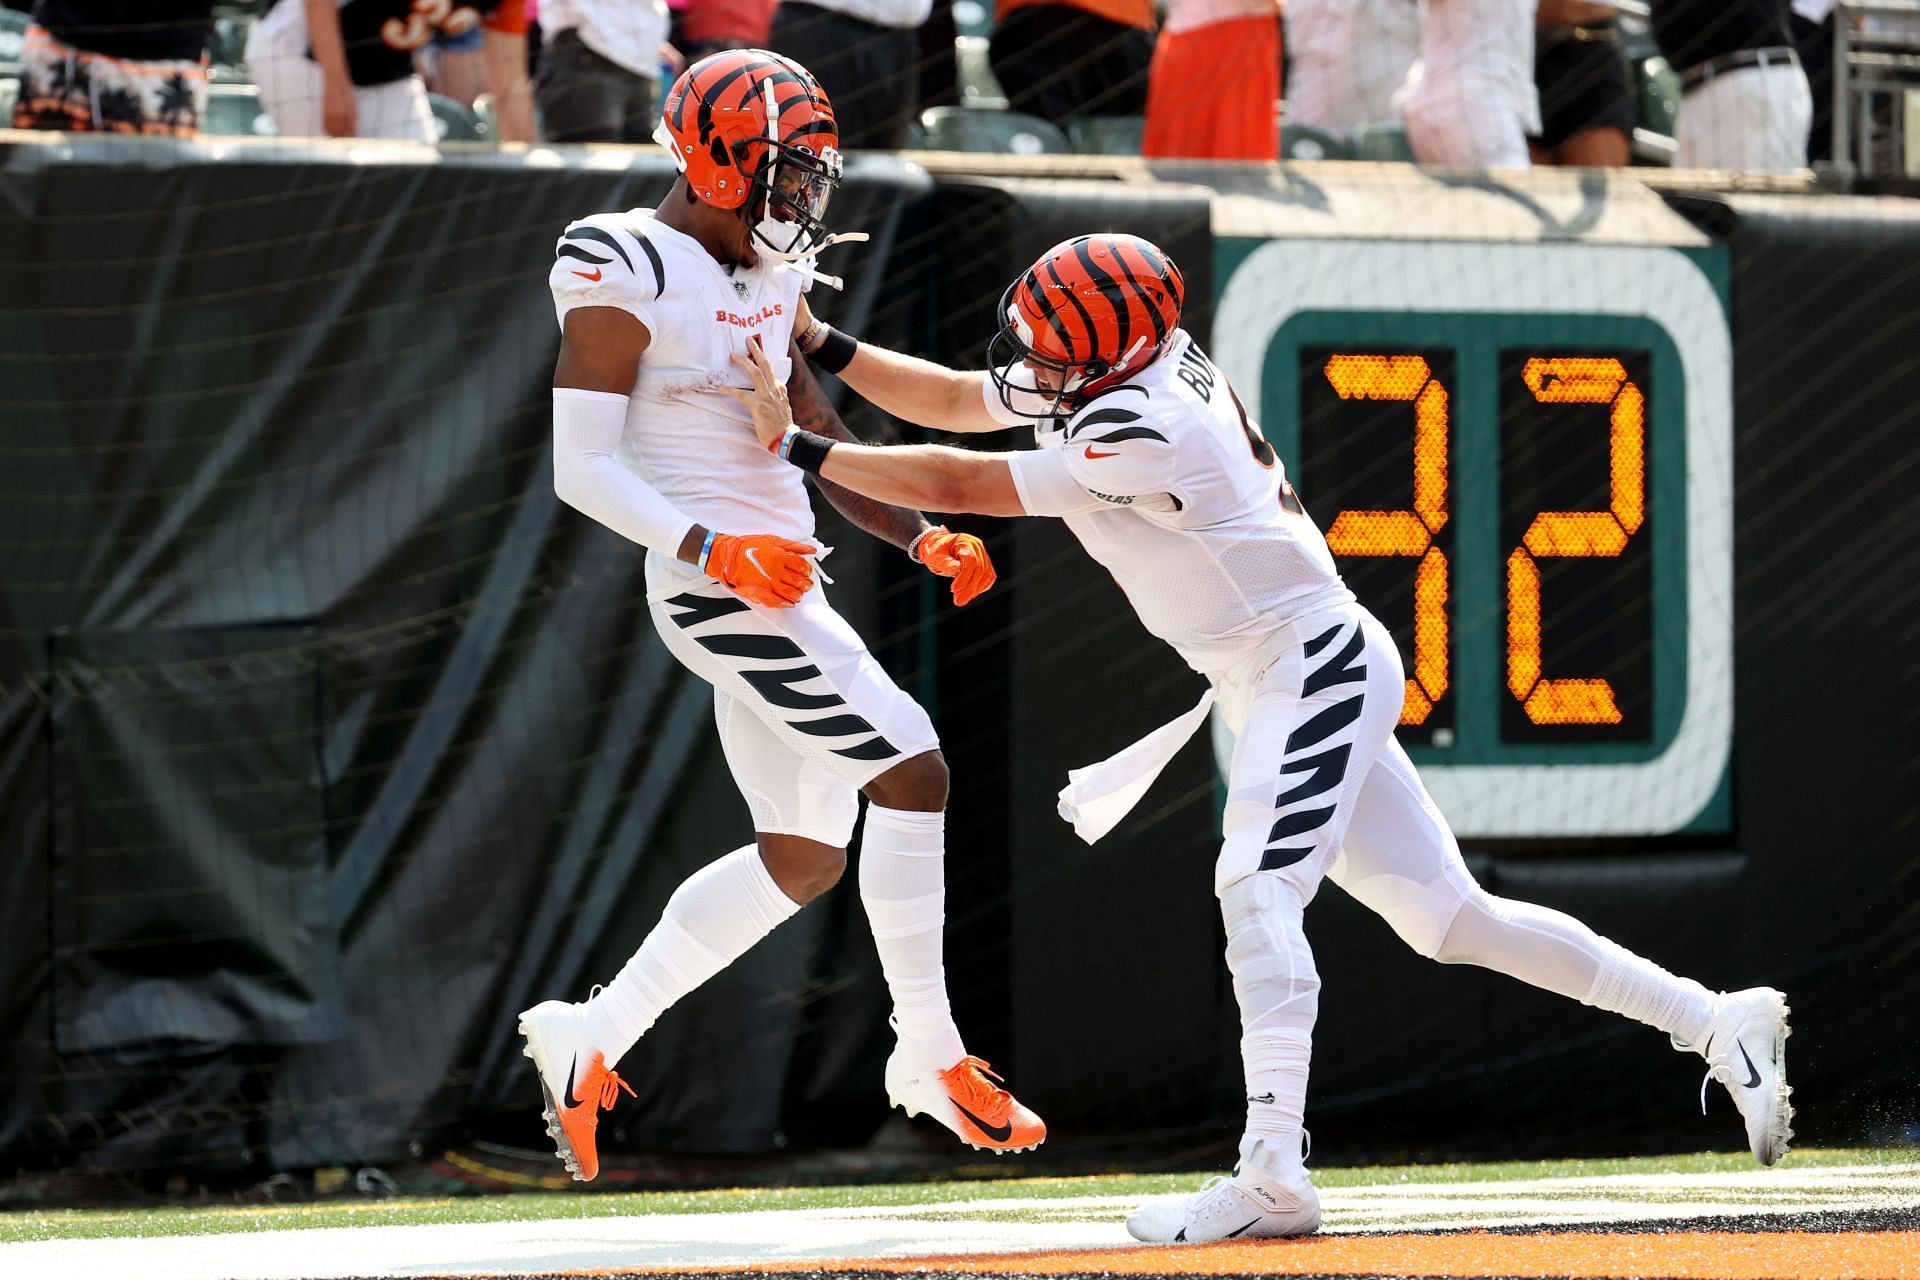 First look at Joe Burrow, Ja'Marr Chase and more Bengals in their